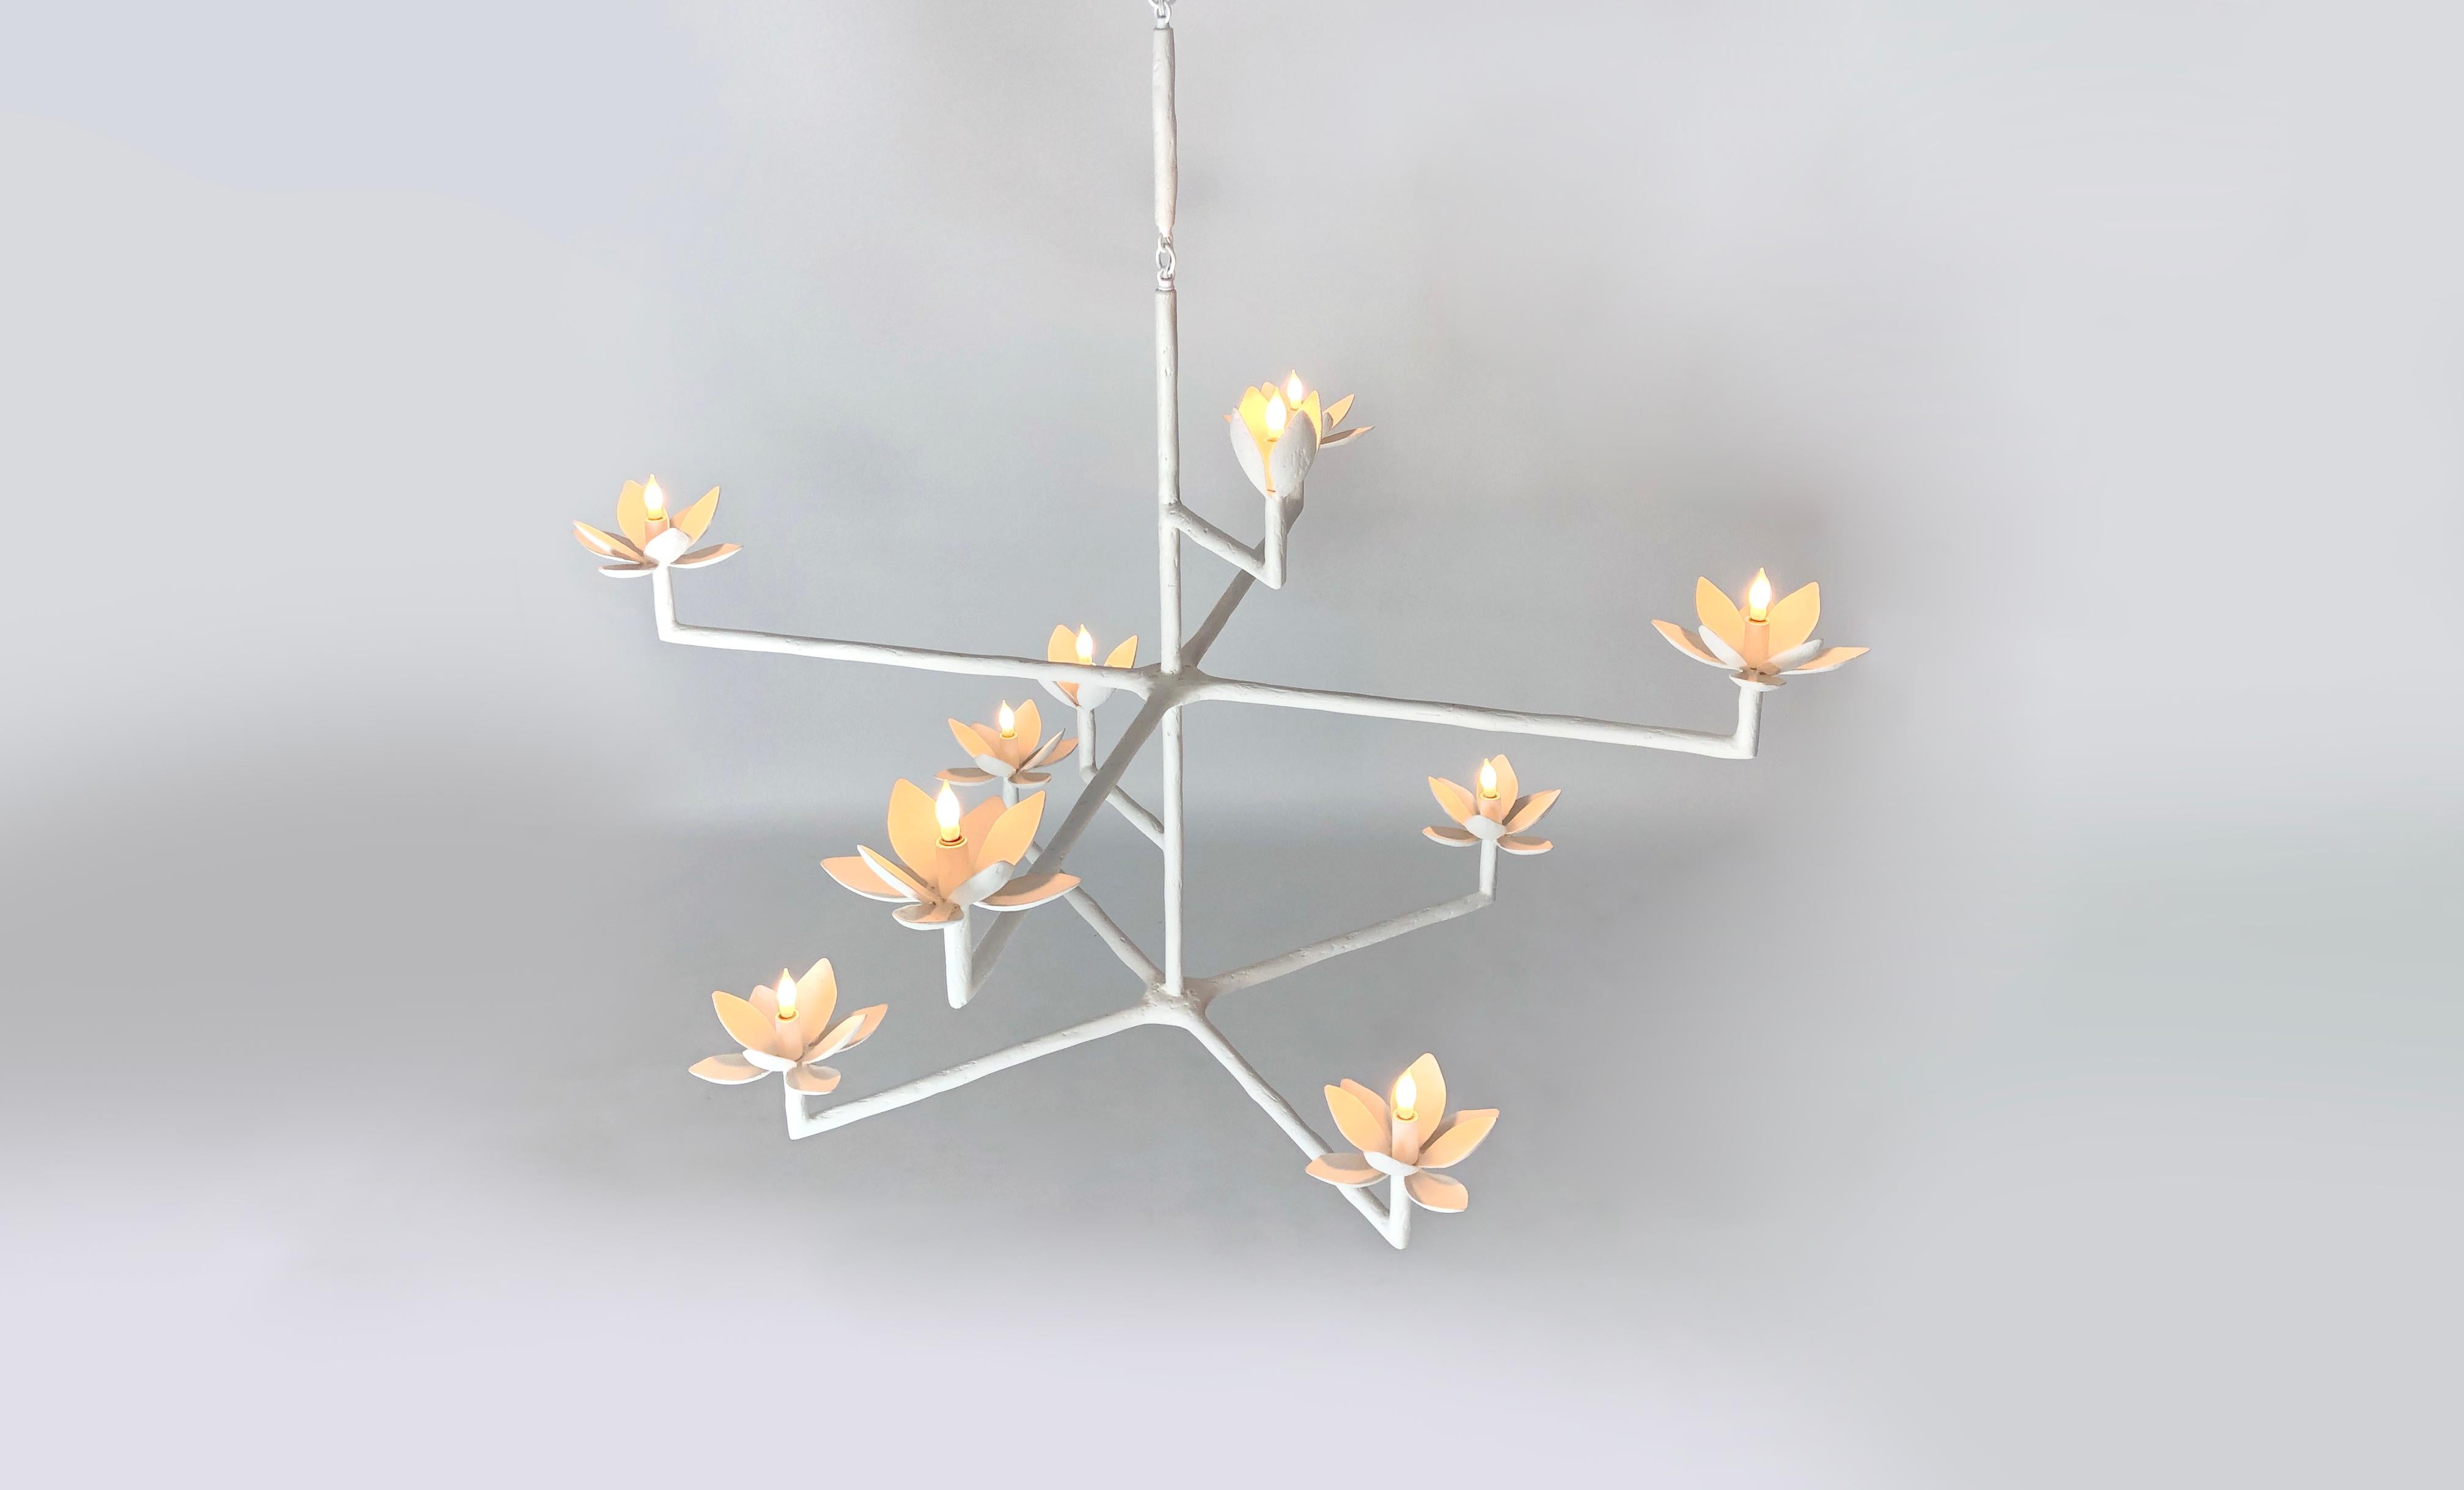 The magnolias are in bloom. In their various stages, the blossoms conceal the lights of this asymmetrical chandelier. The textured plaster of Paris finish on its stately frame creates a chandelier perfect for the foyer or above a dining table. With